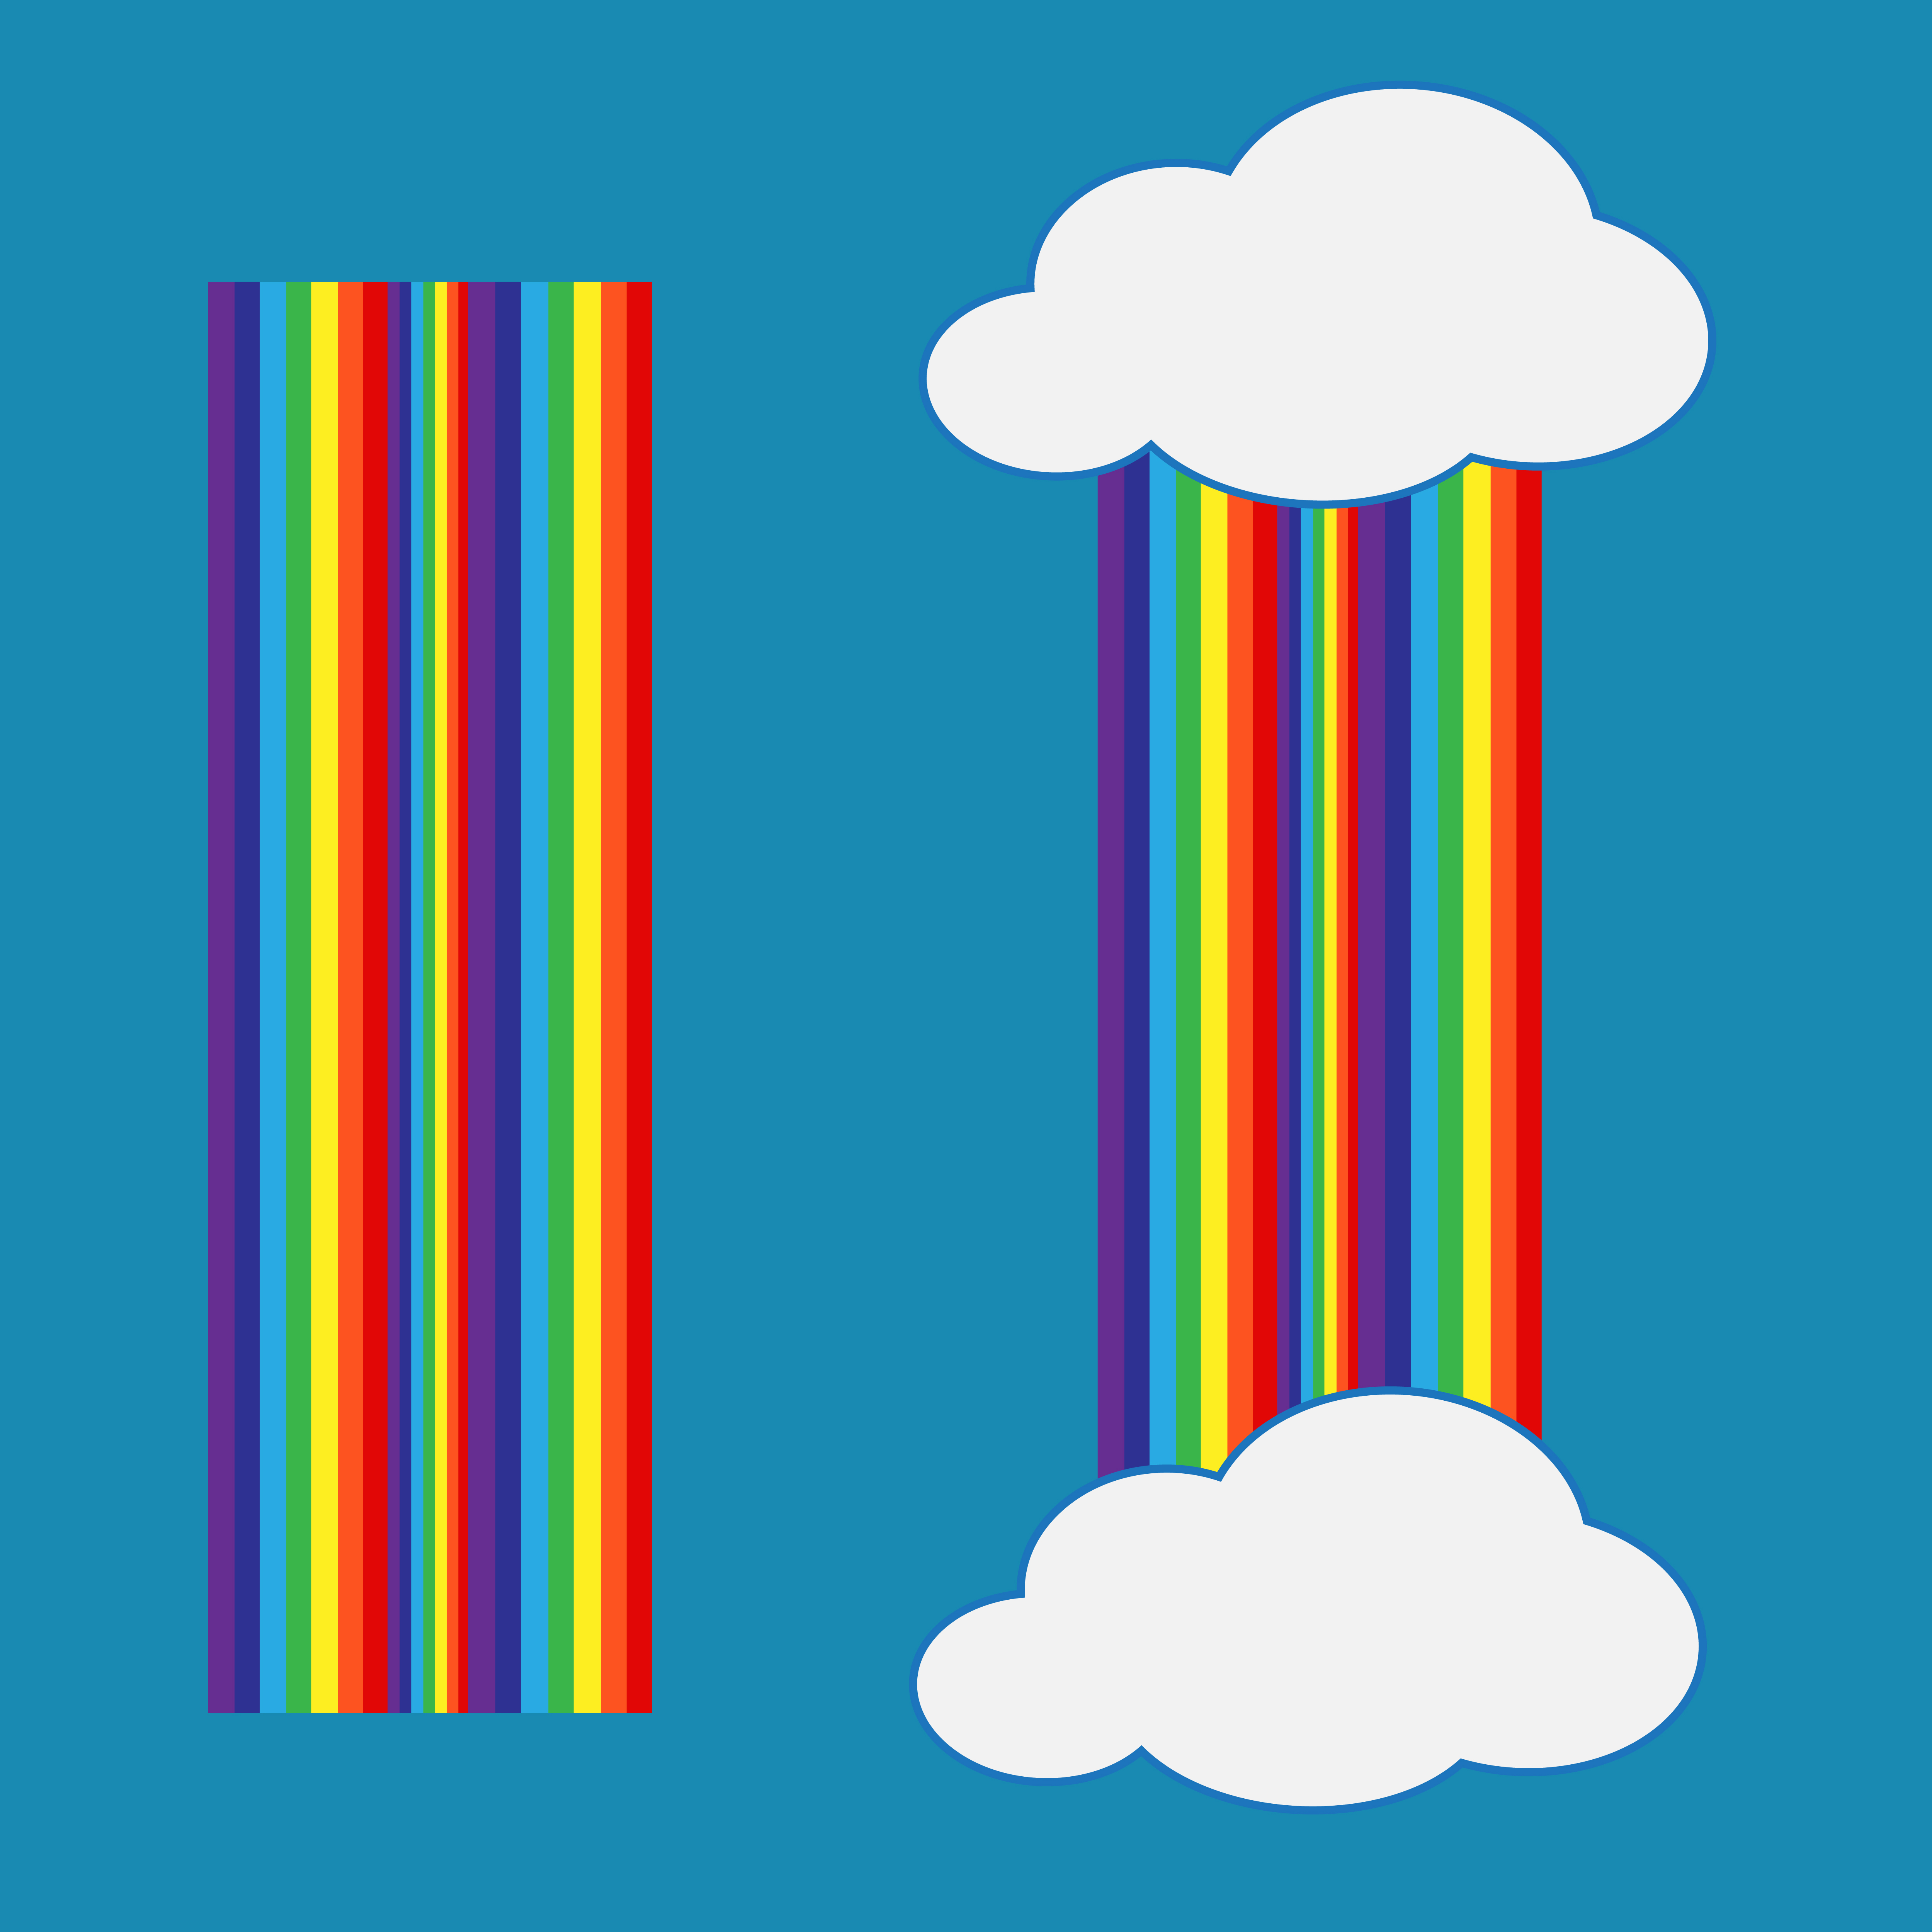 Download rainbow with cloud icon 572881 - Download Free Vectors ...